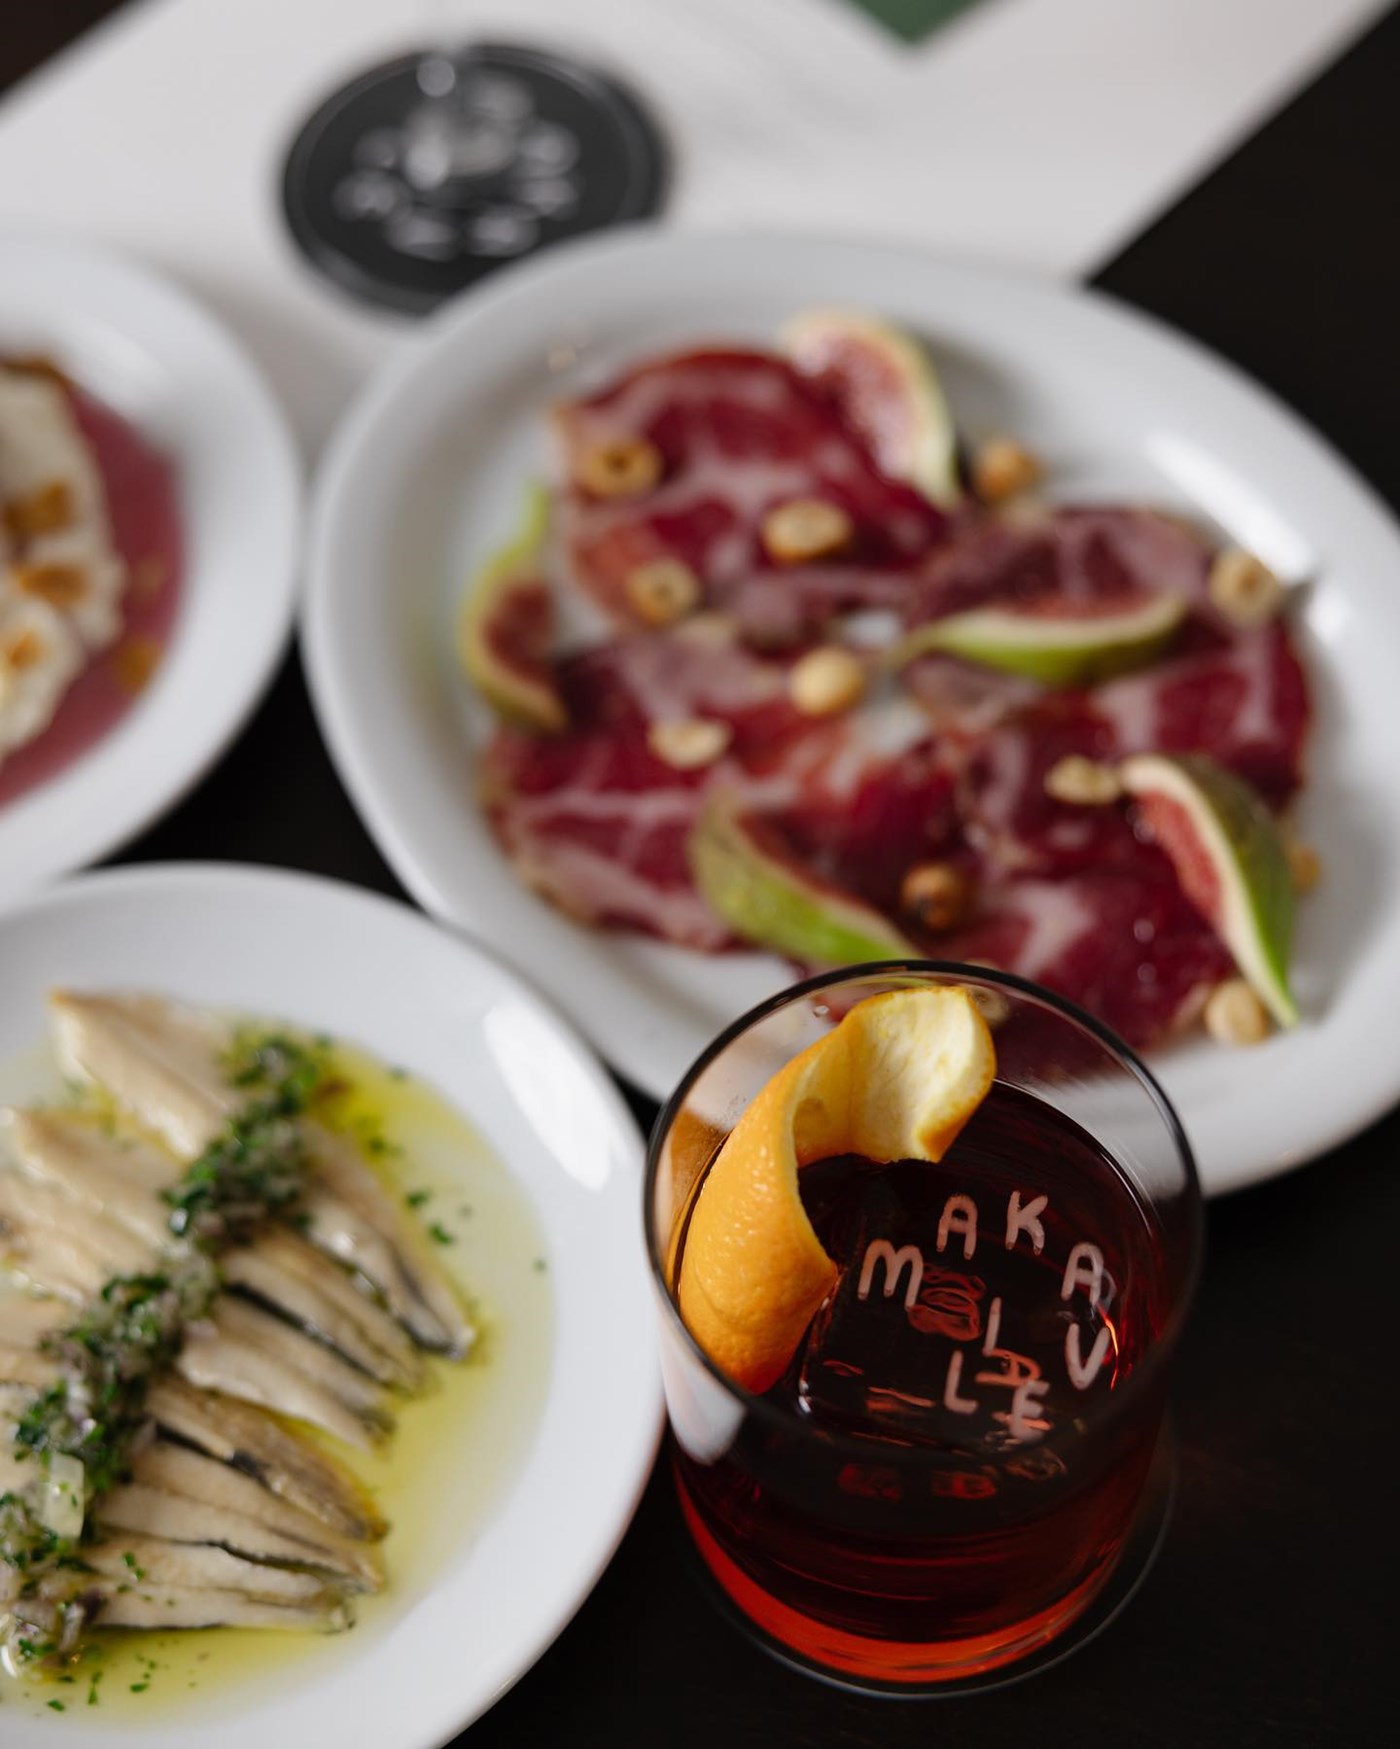 A negroni and assorted tapas plates at Makaveli 